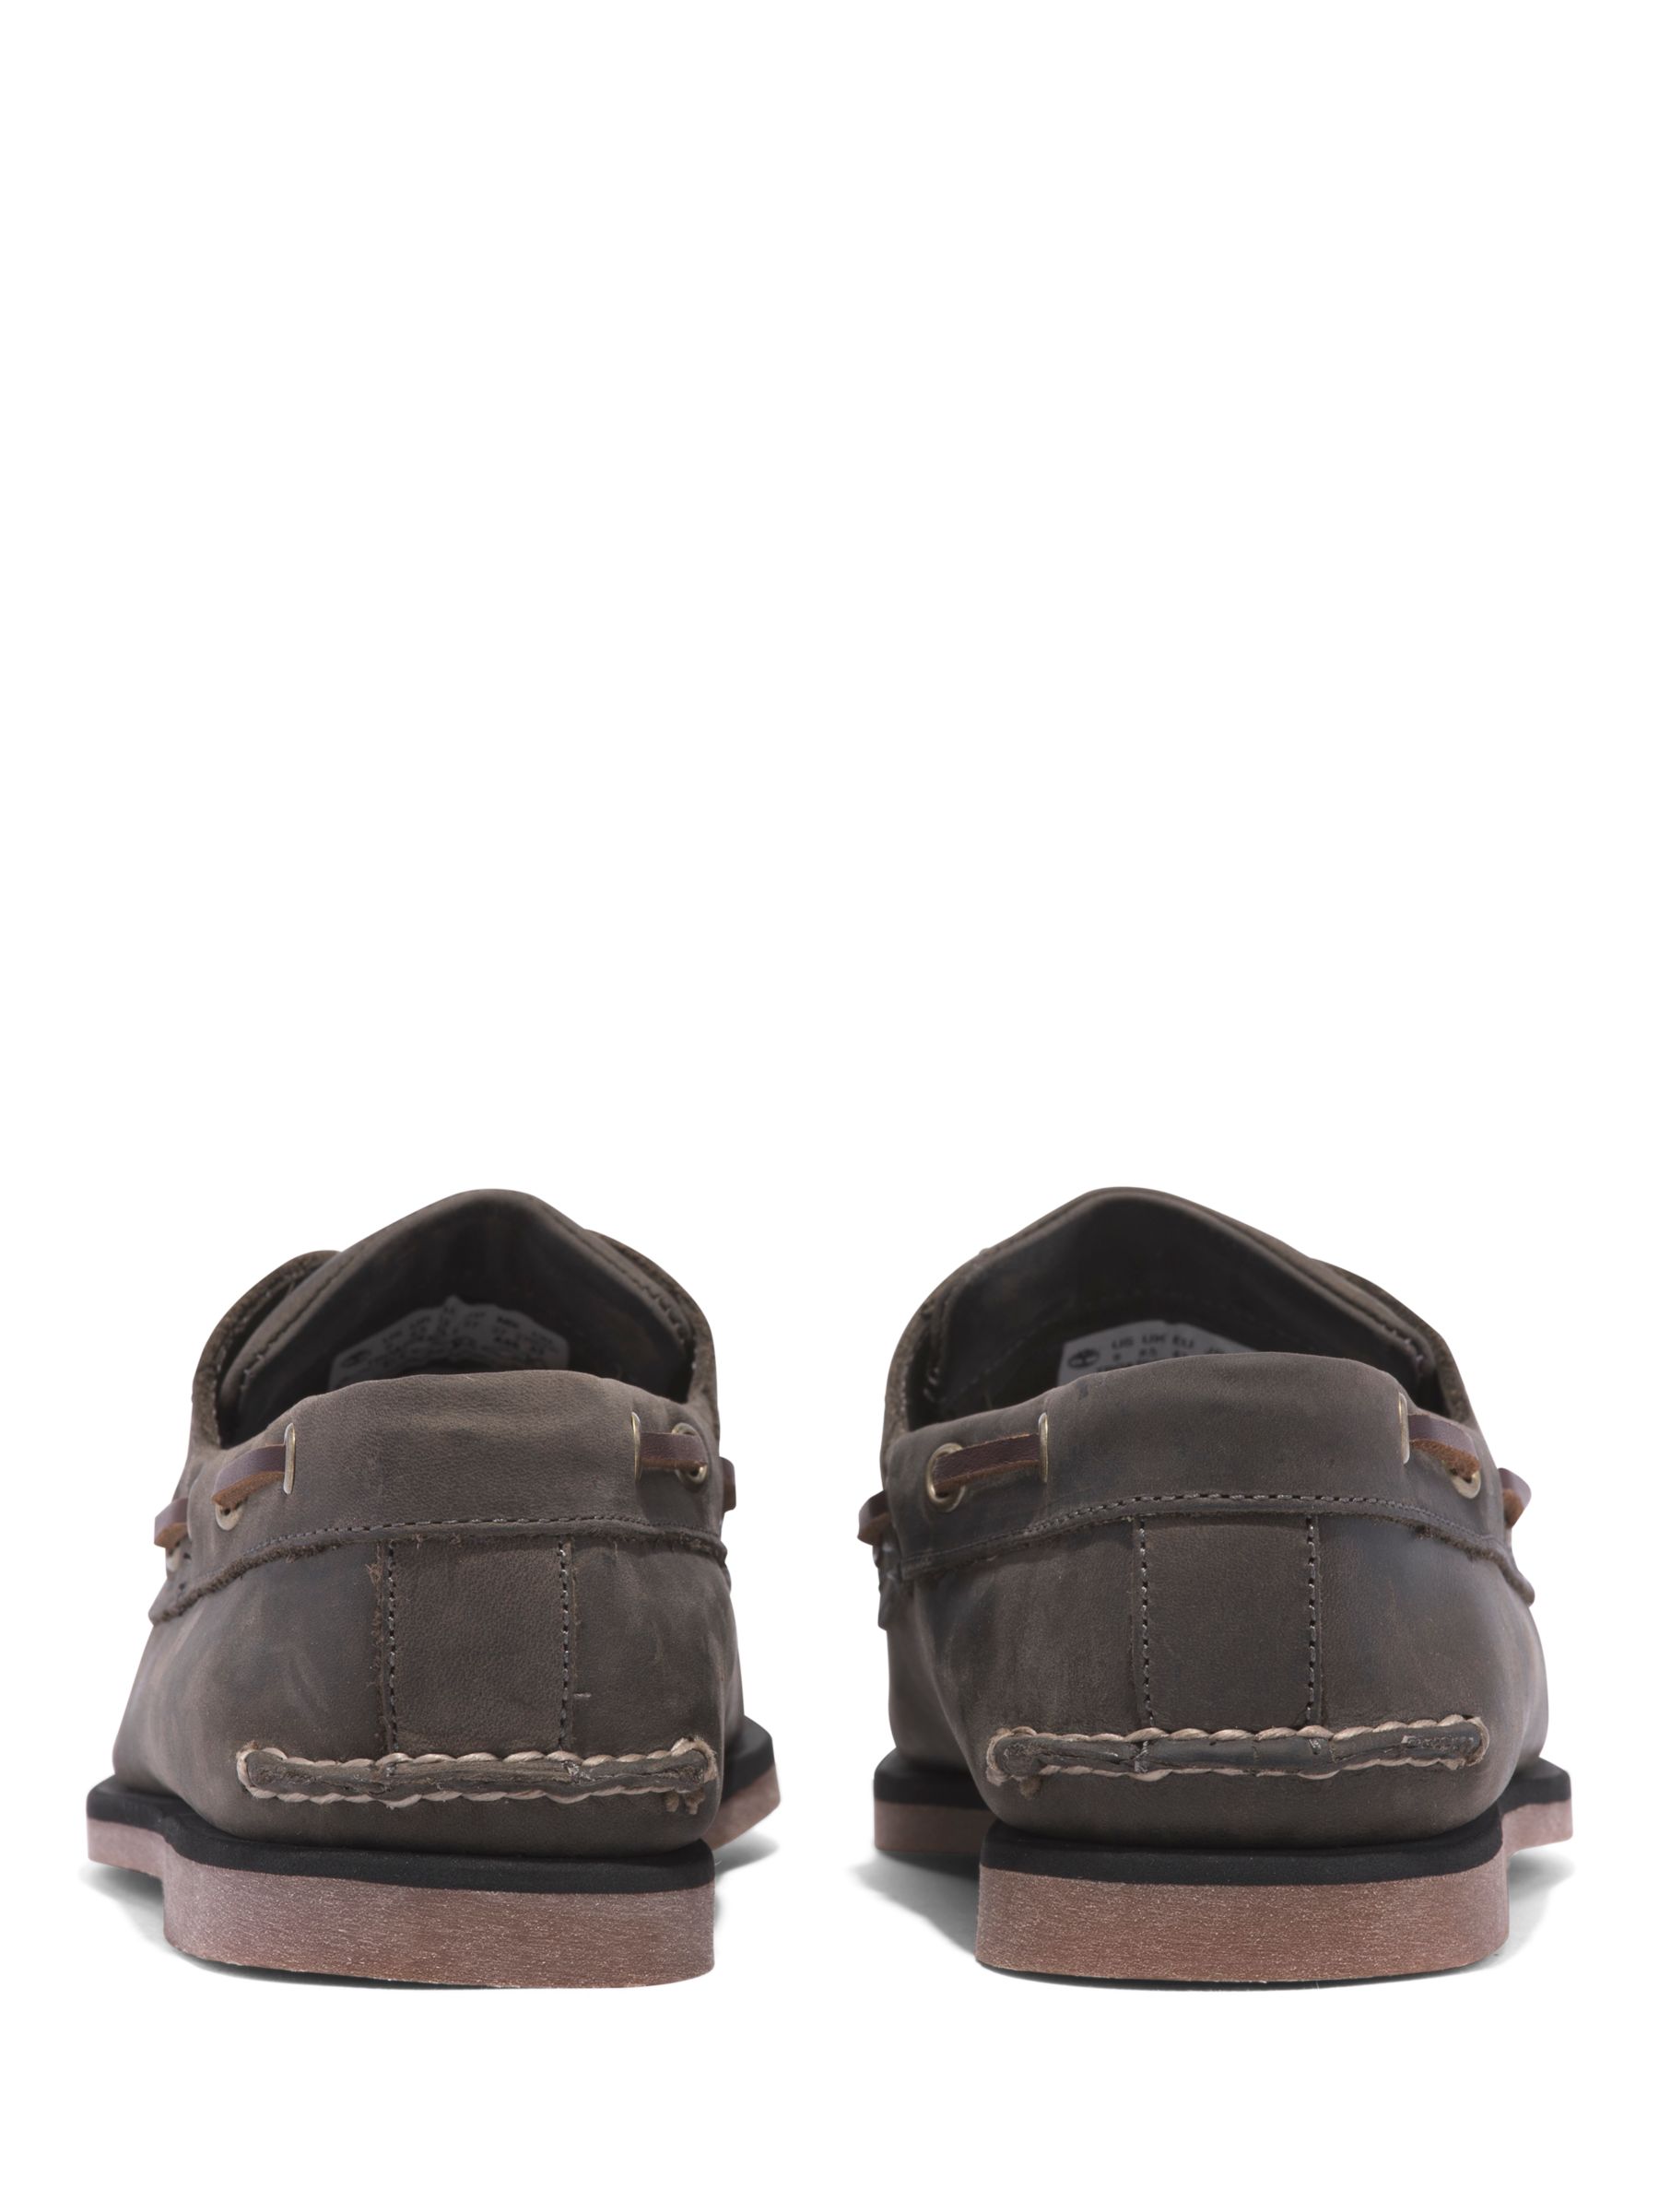 Buy Timberland Classic Boat Shoes, Mid Grey Online at johnlewis.com